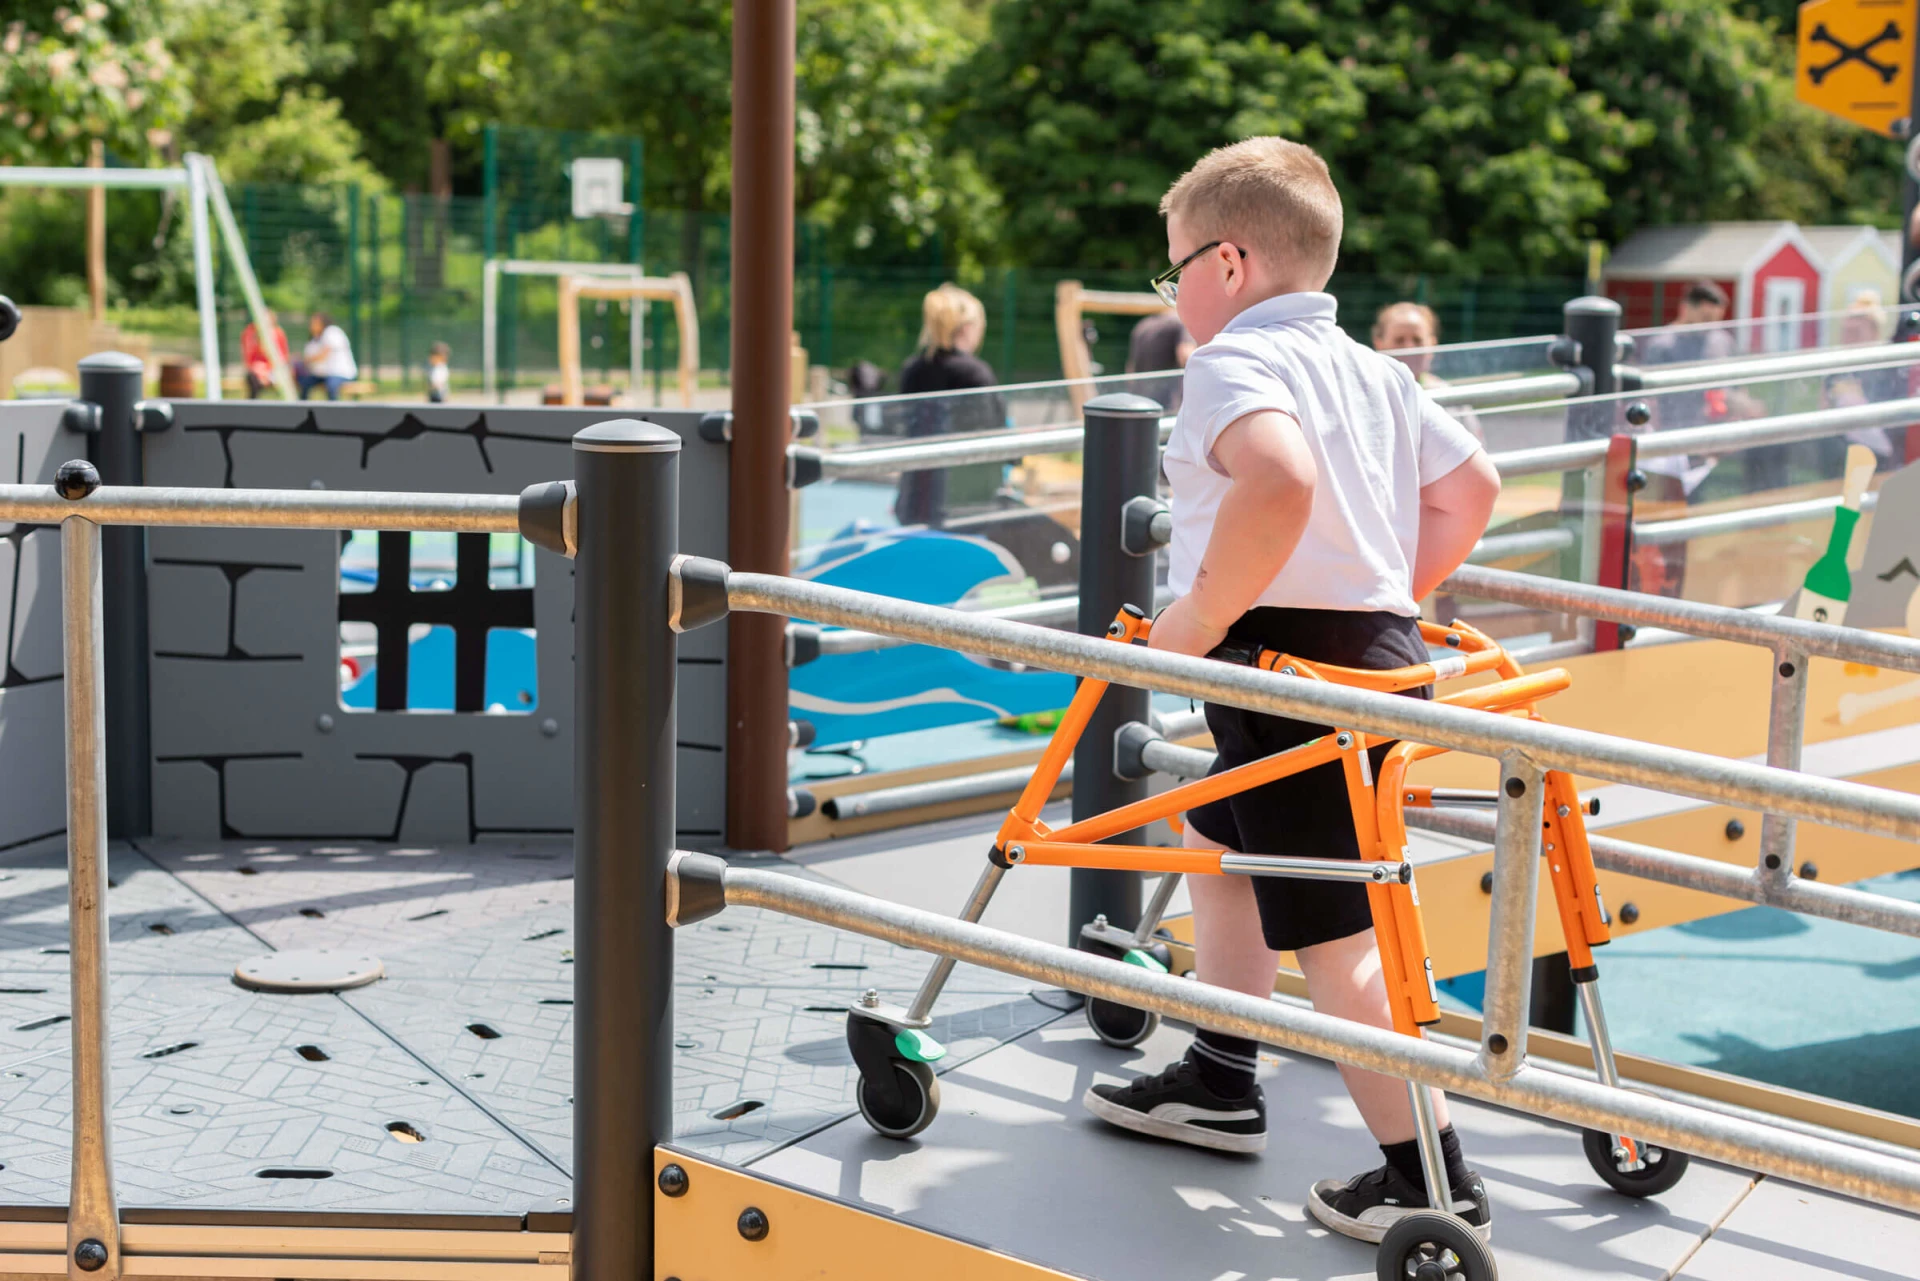 children playing on special education needs playground equipment